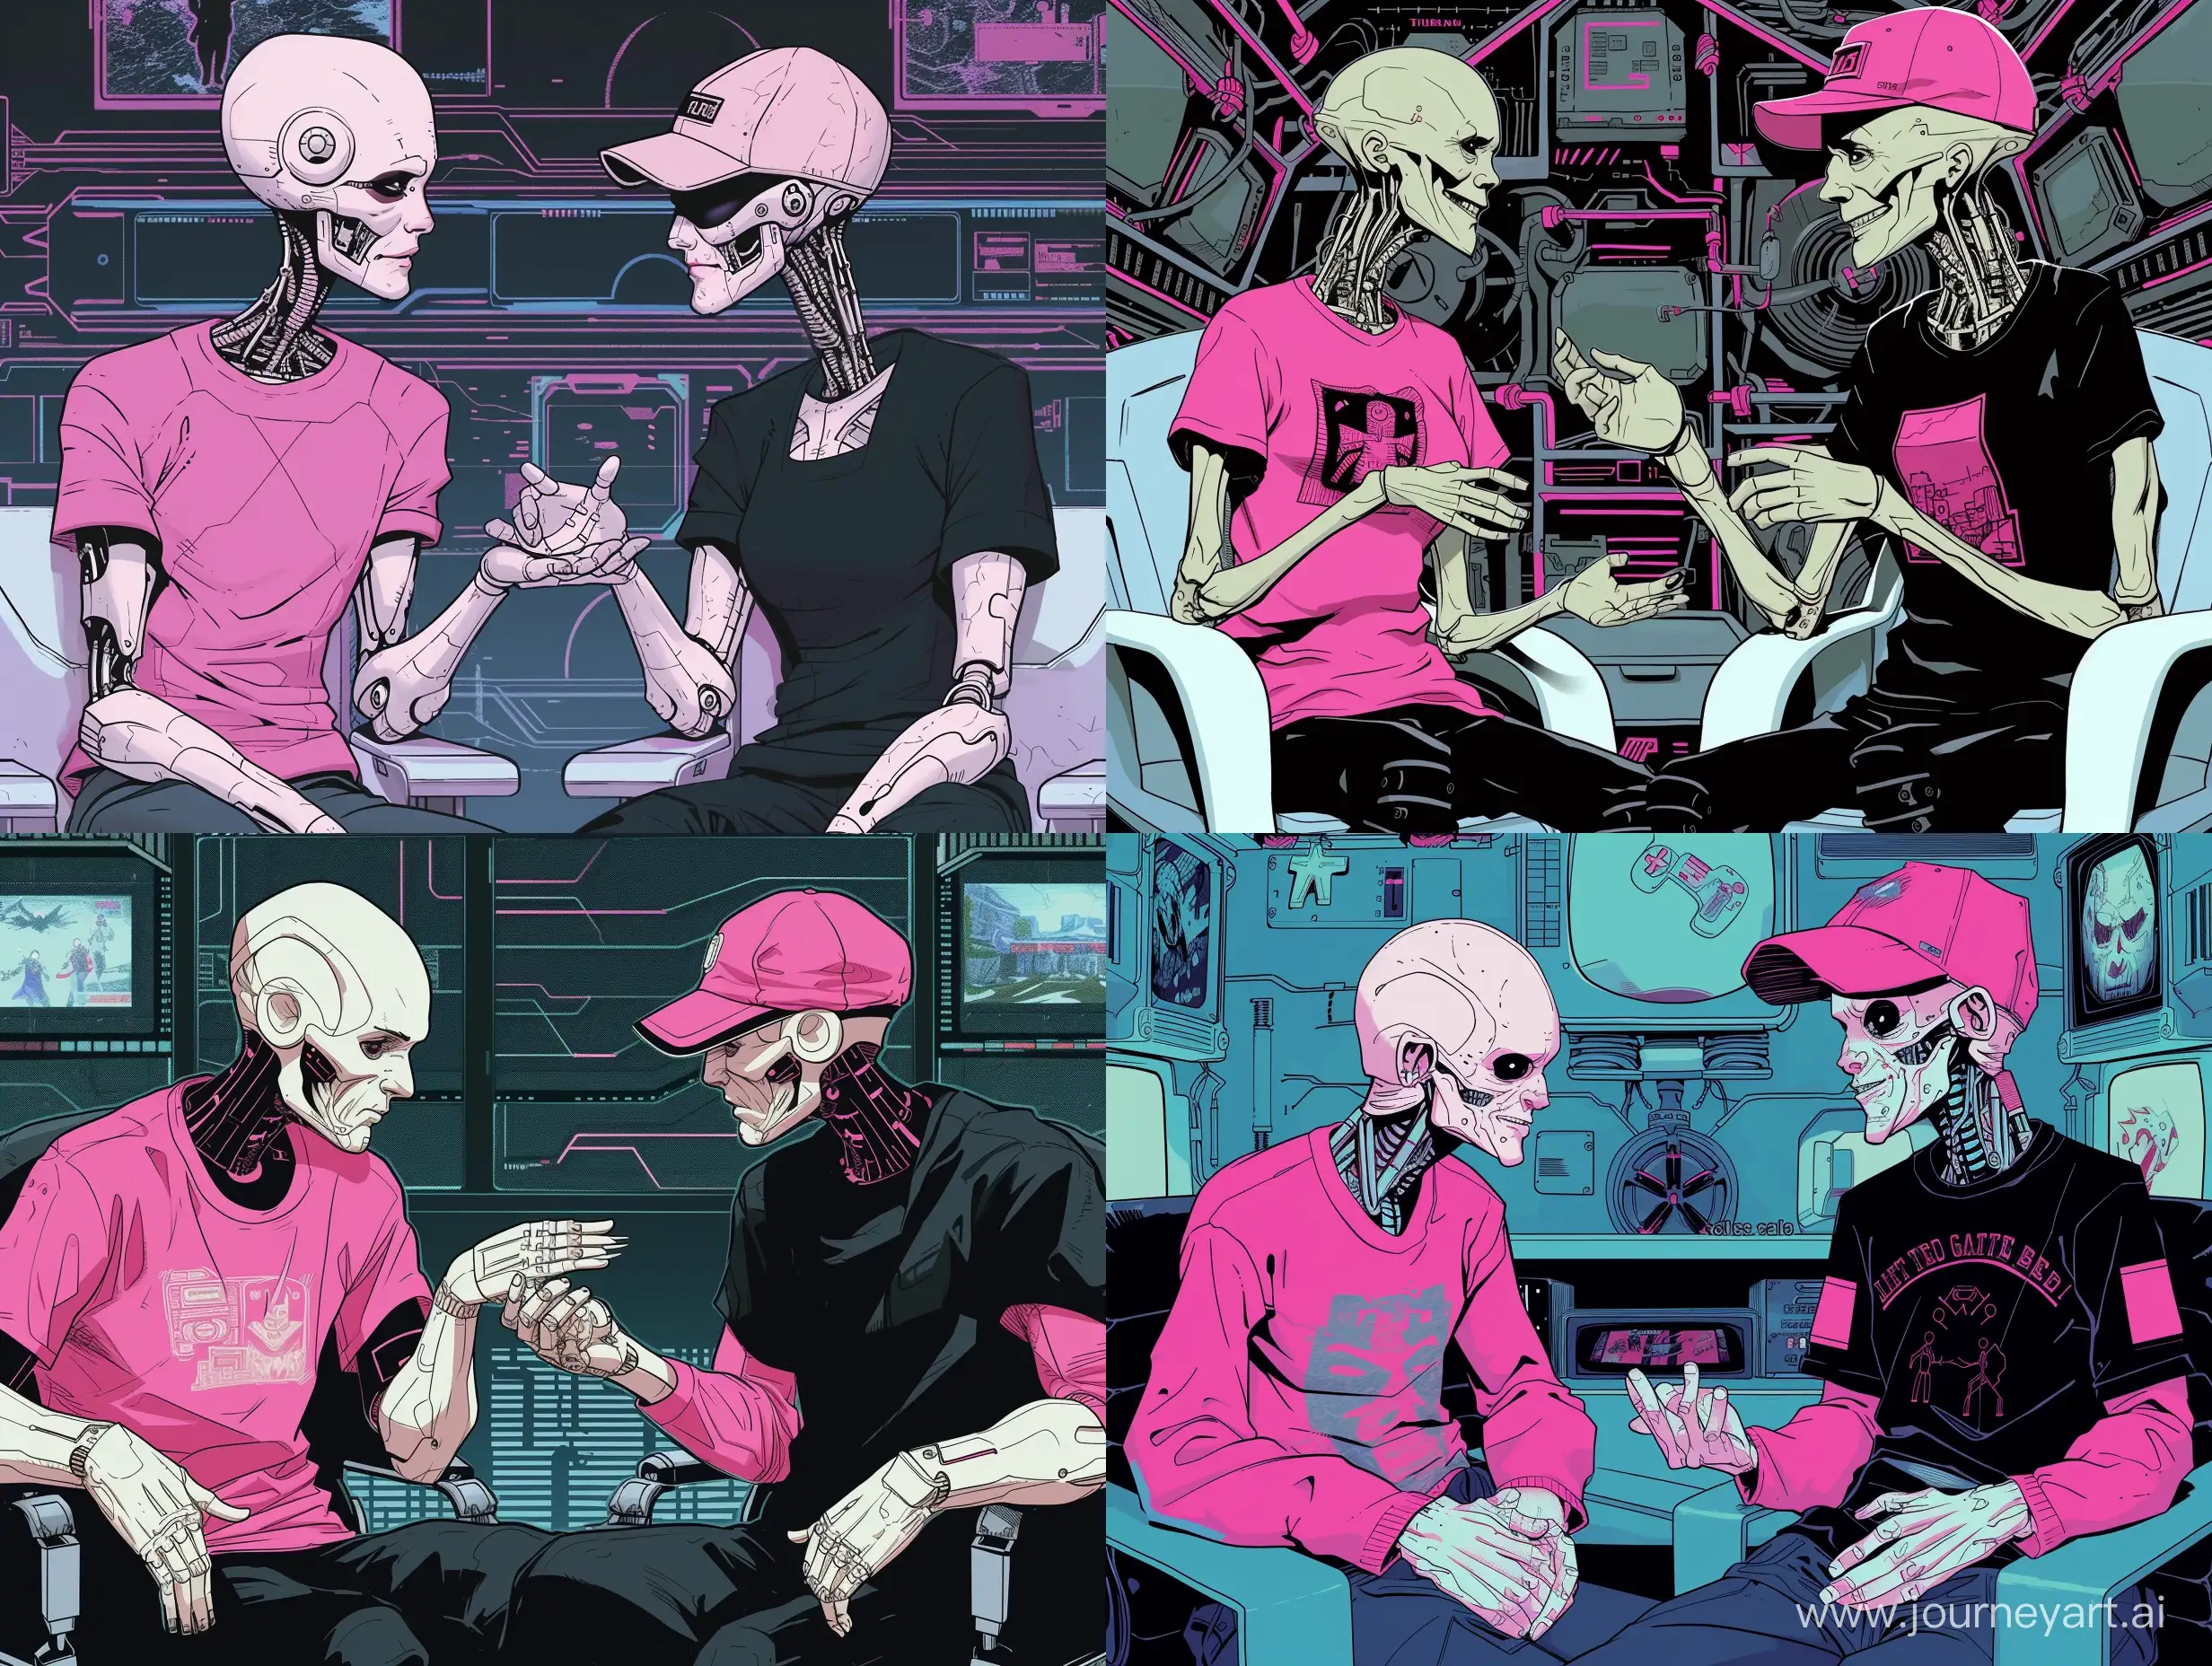 two 40 year old skinny bald robots sitting and discussing retro games, pink shirt, black shirt, hi-tech background, one robot has a baseball cap on his head, comic style image, 16:9 image aspect ratio 